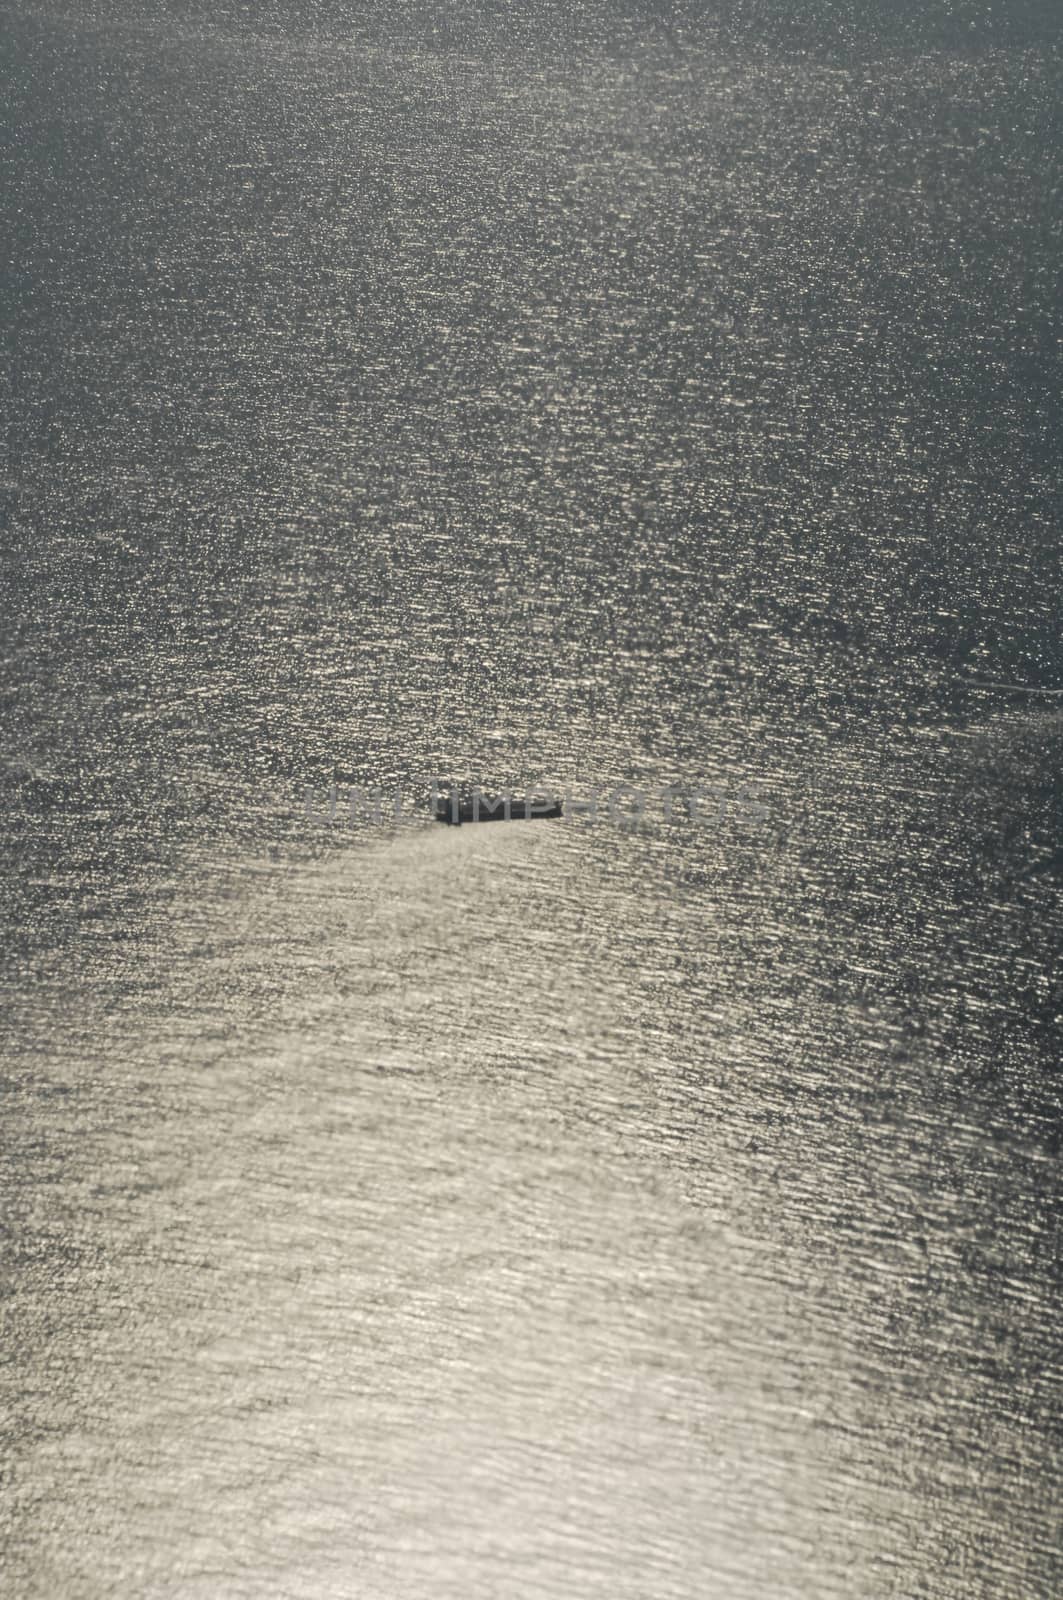 Aerial view of a Tourist Boat